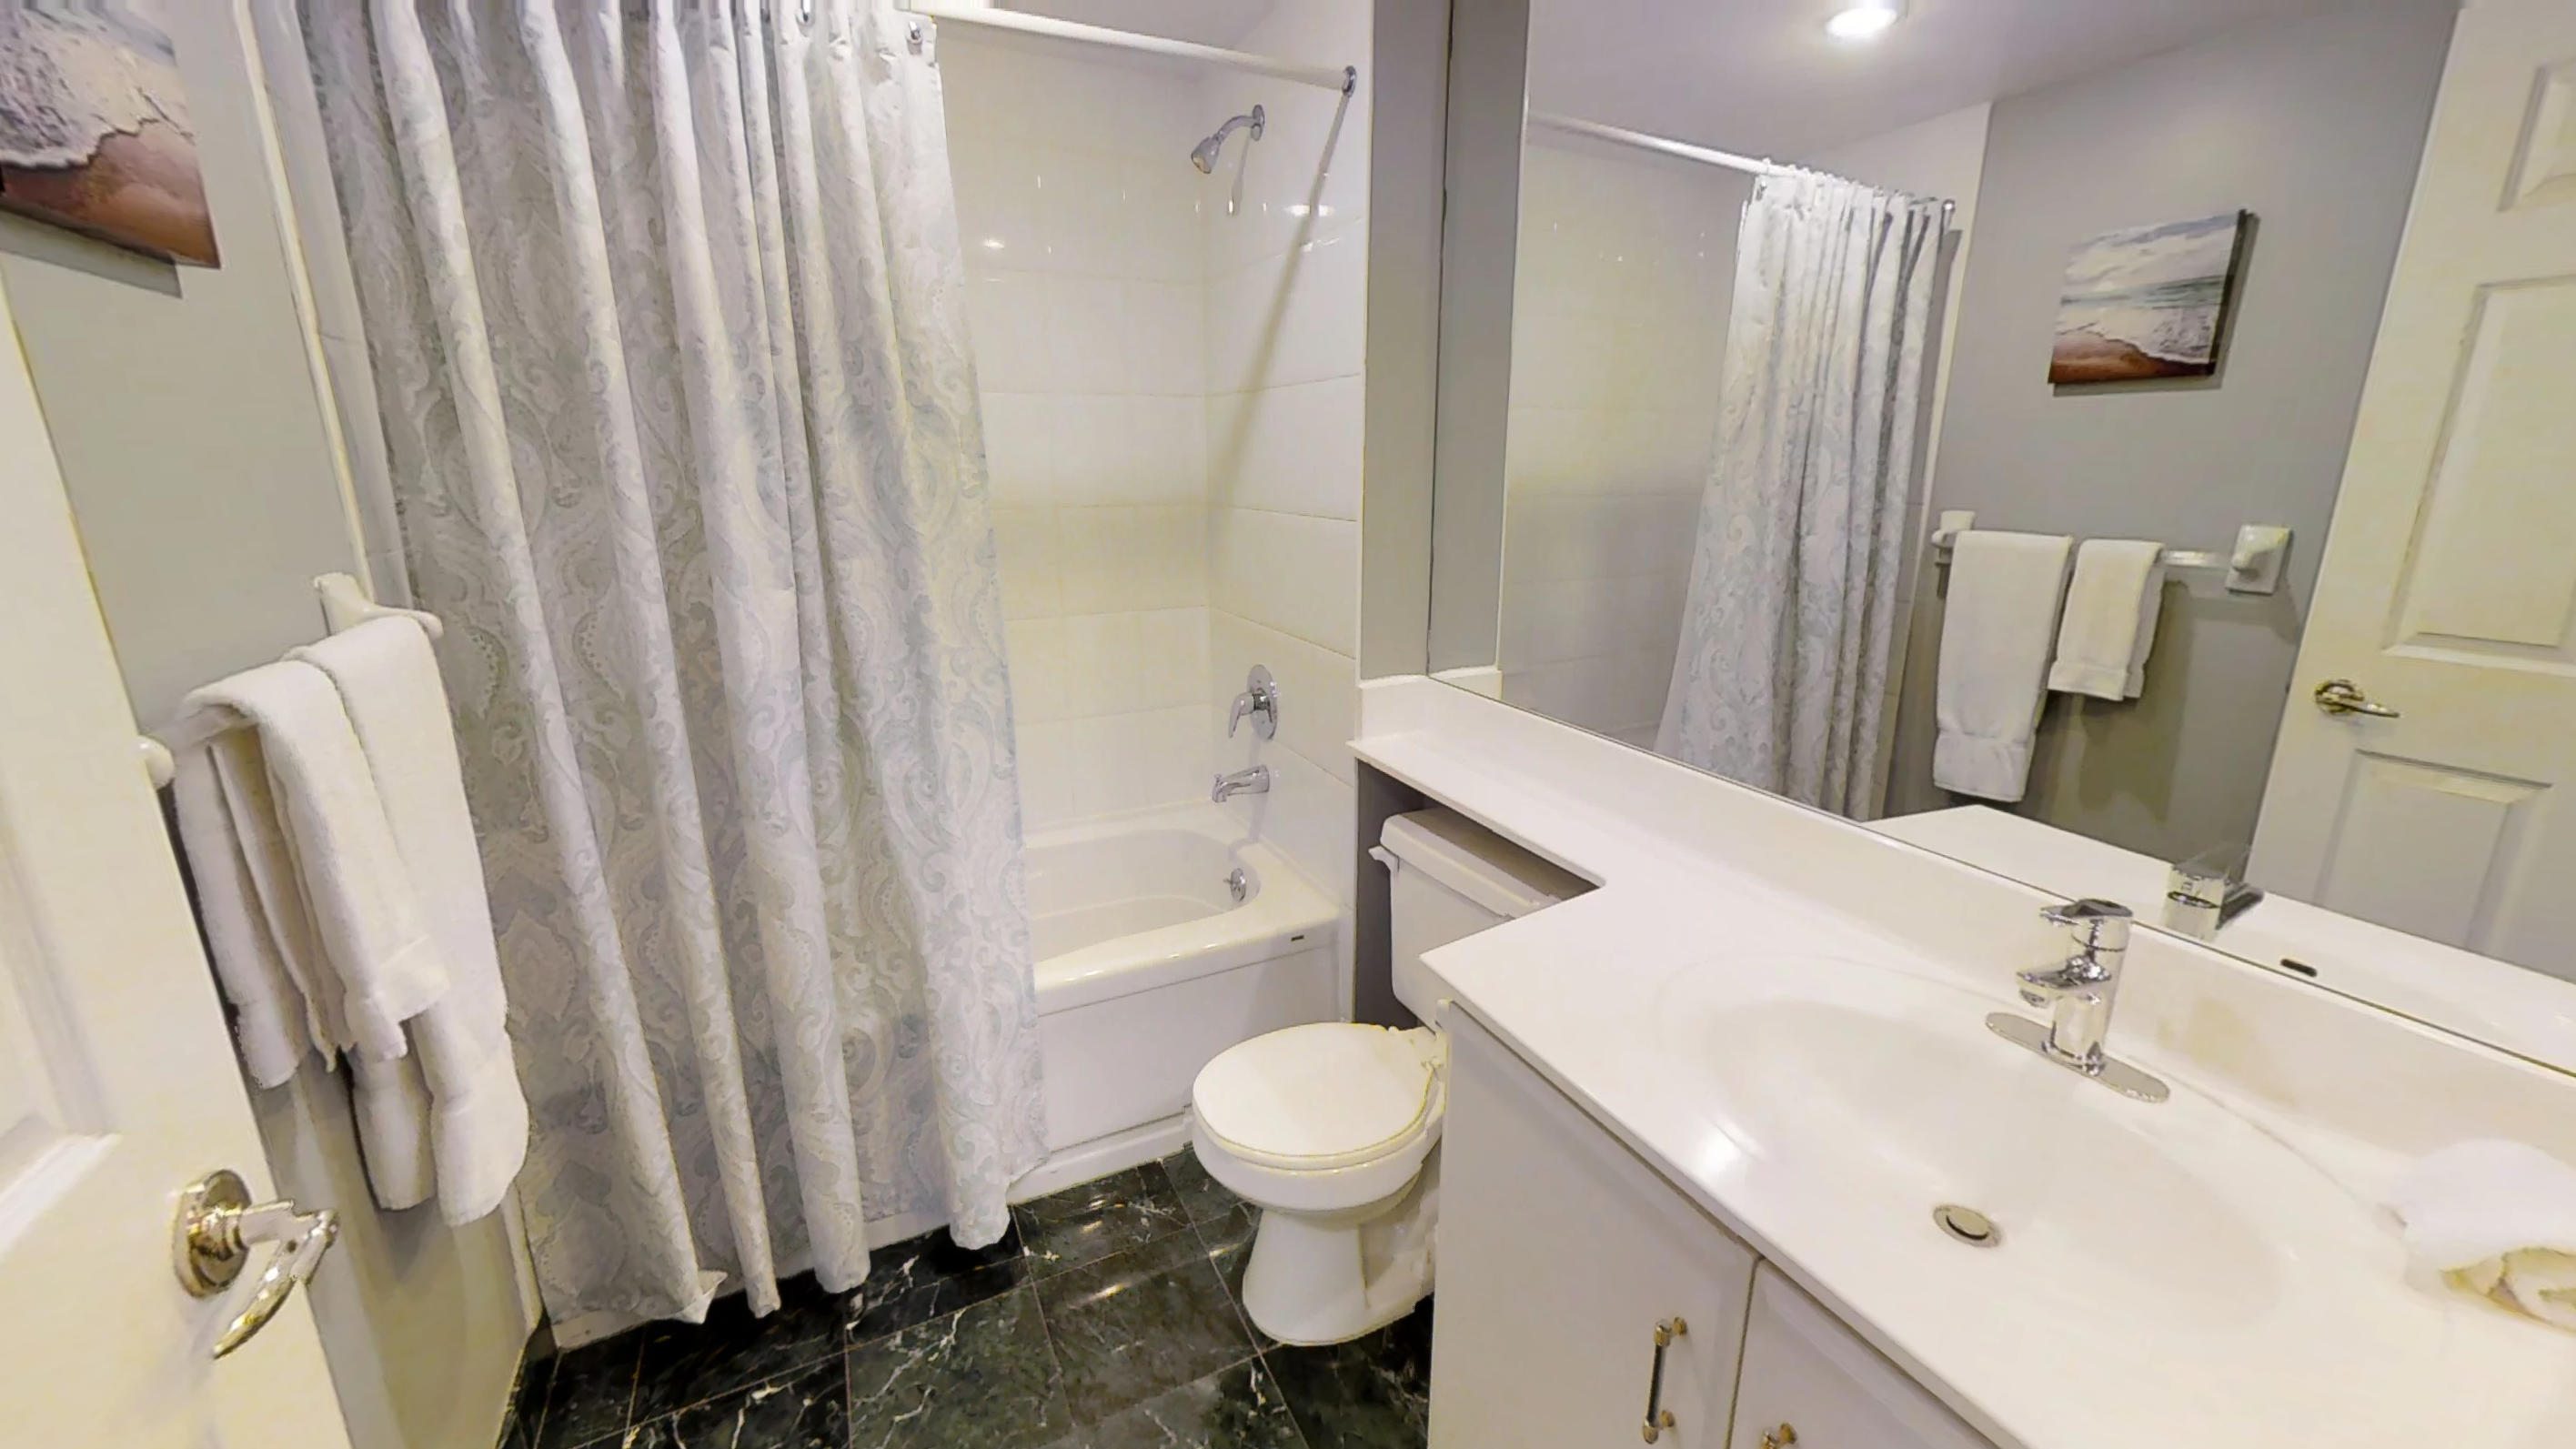 Furnished bathroom in a one bedroom furnished apartment in Qwest